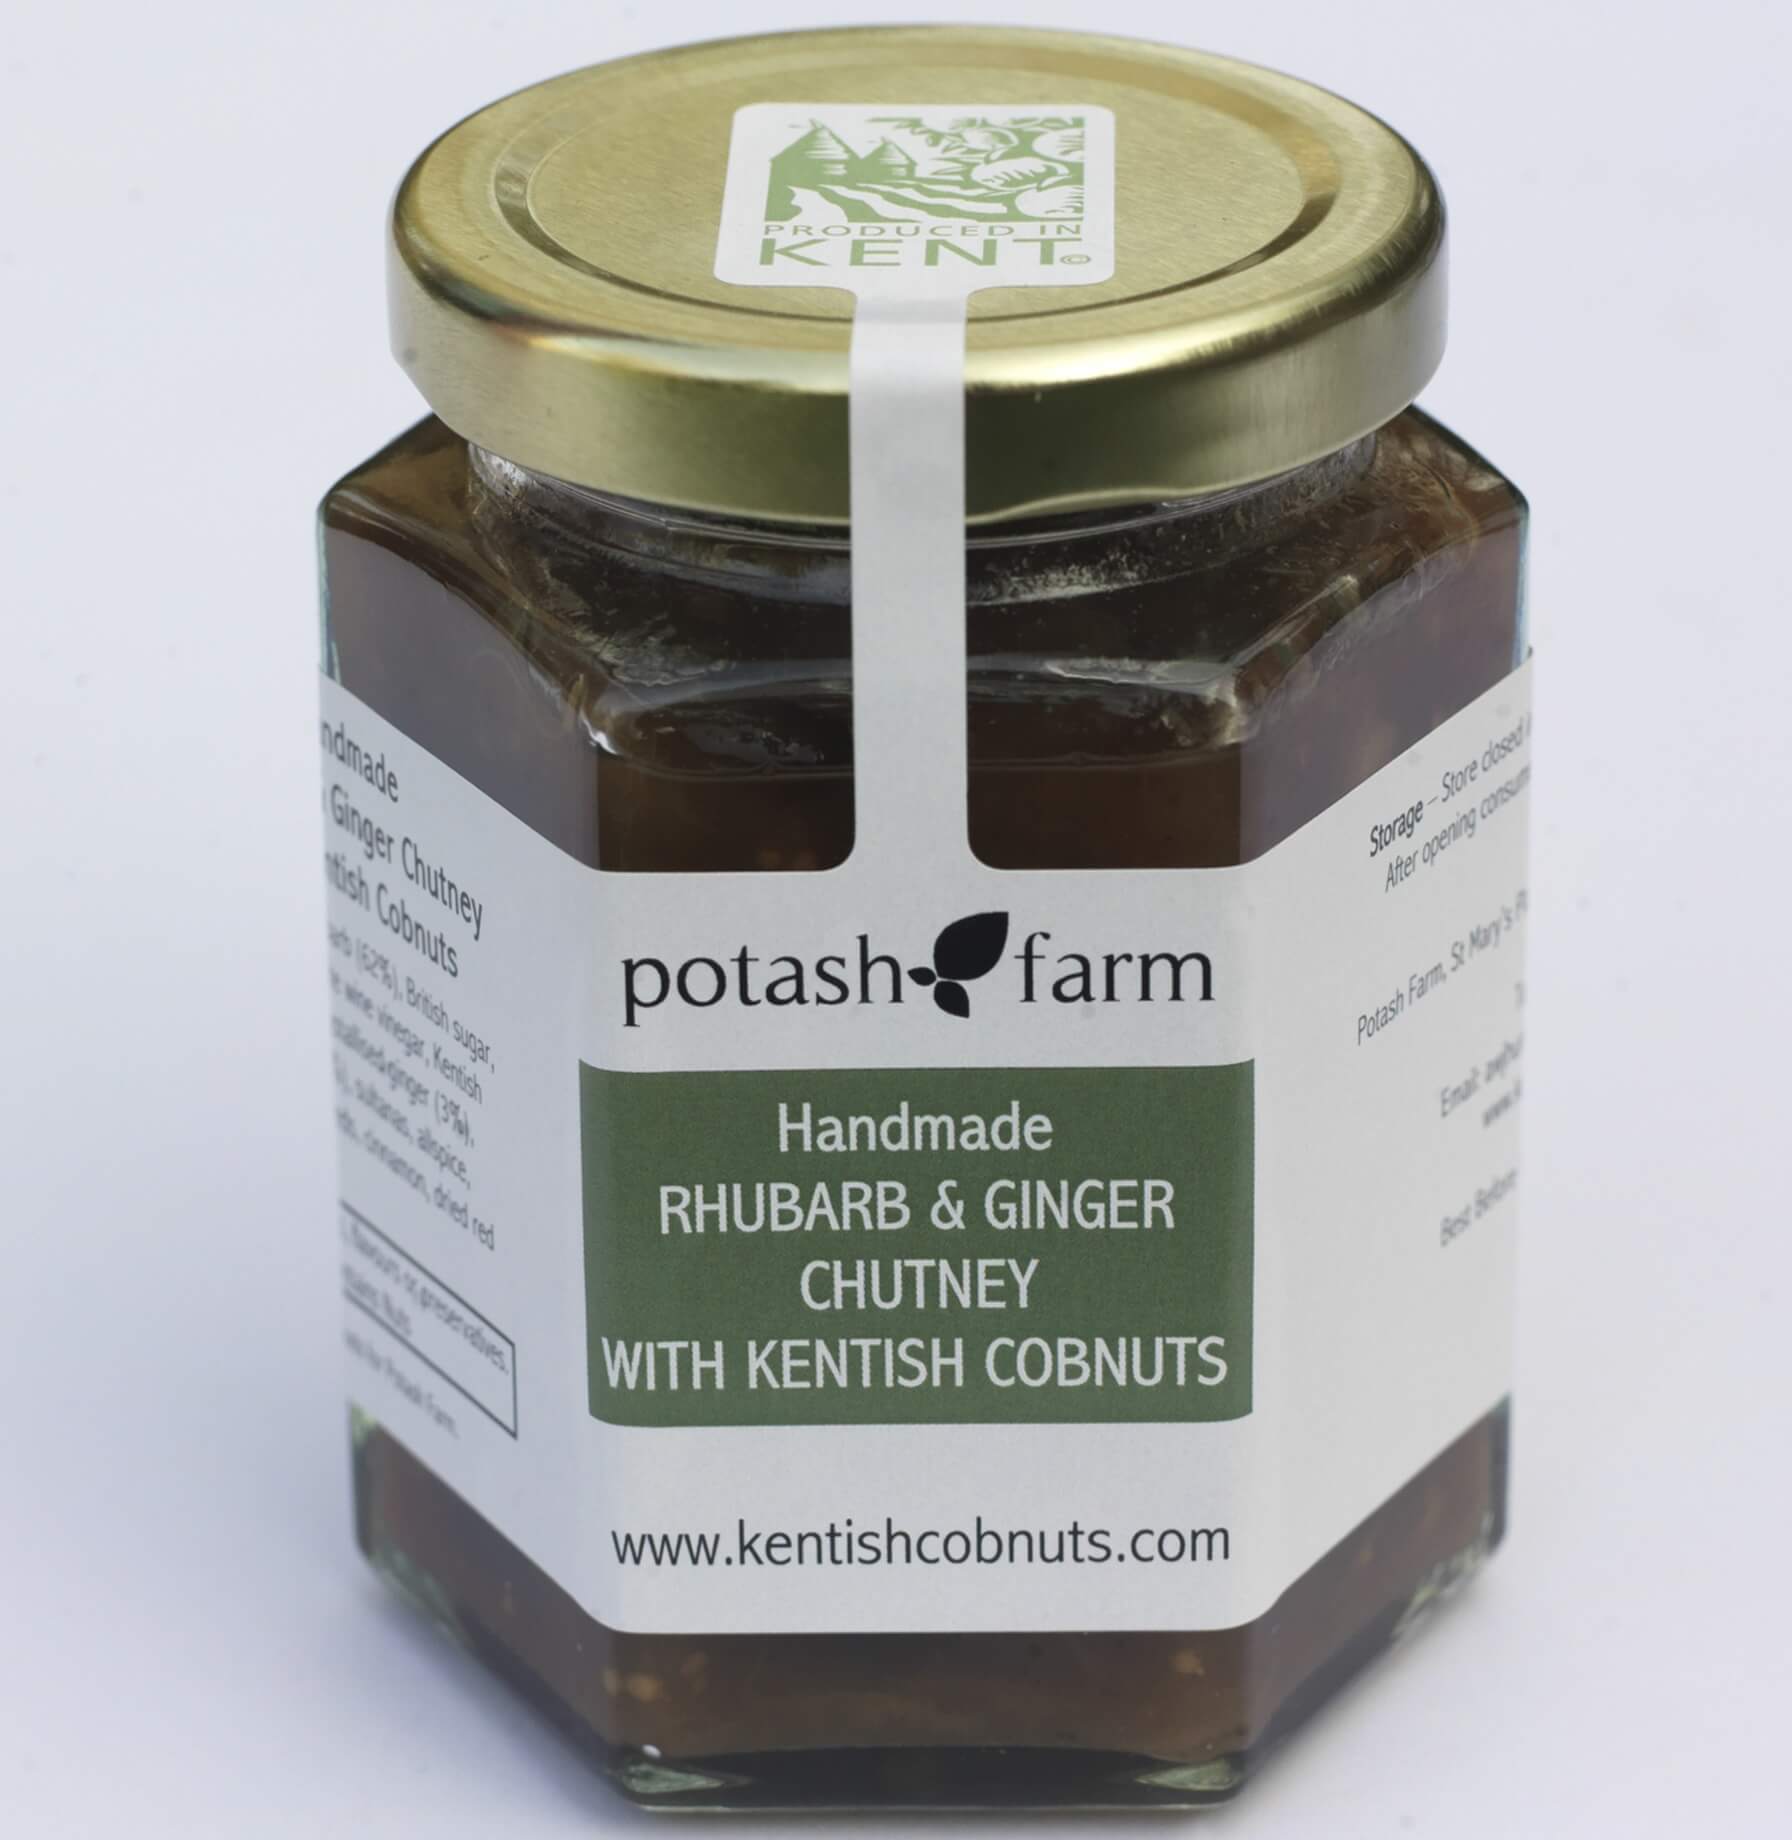 Featured in the Telegraph Magazine - "The Potash Farm Rhubarb and Ginger Chutney with Kentish Cobnuts. Rich with fruit and slightly crunchy from the Cobnuts. Unlike any chutney I've had."